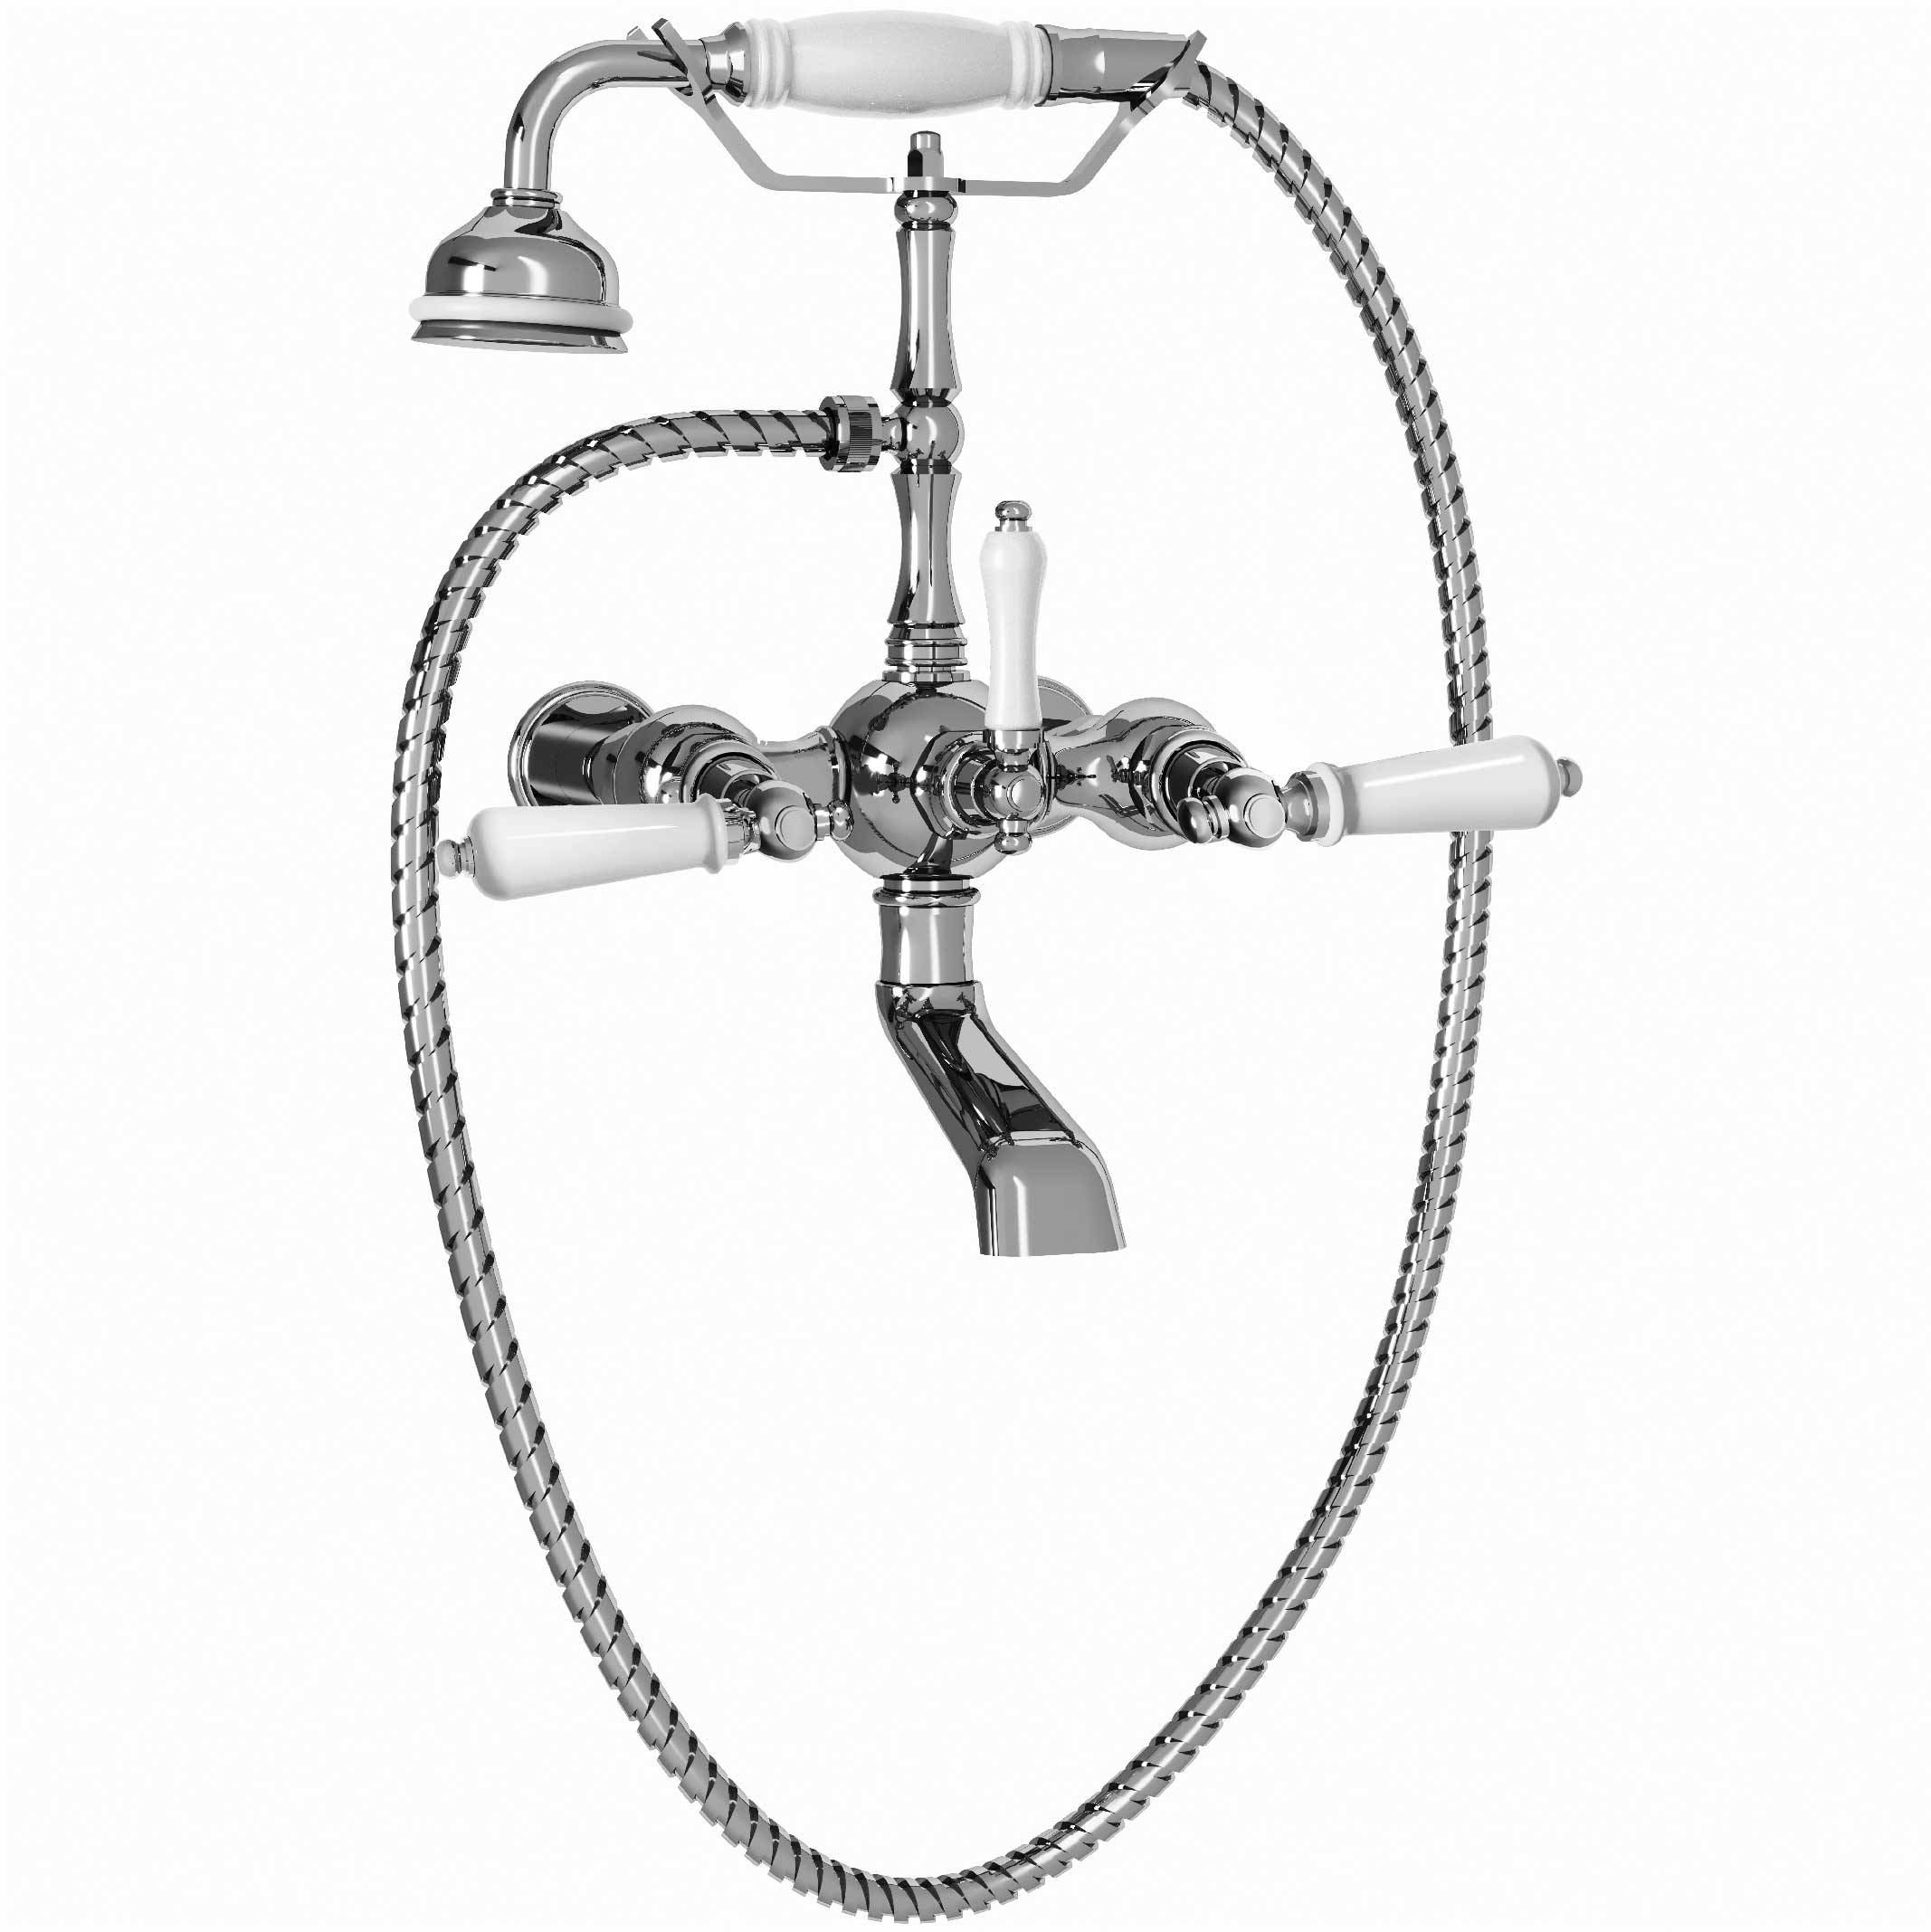 M04-3201 Wall mounted bath and shower mixer